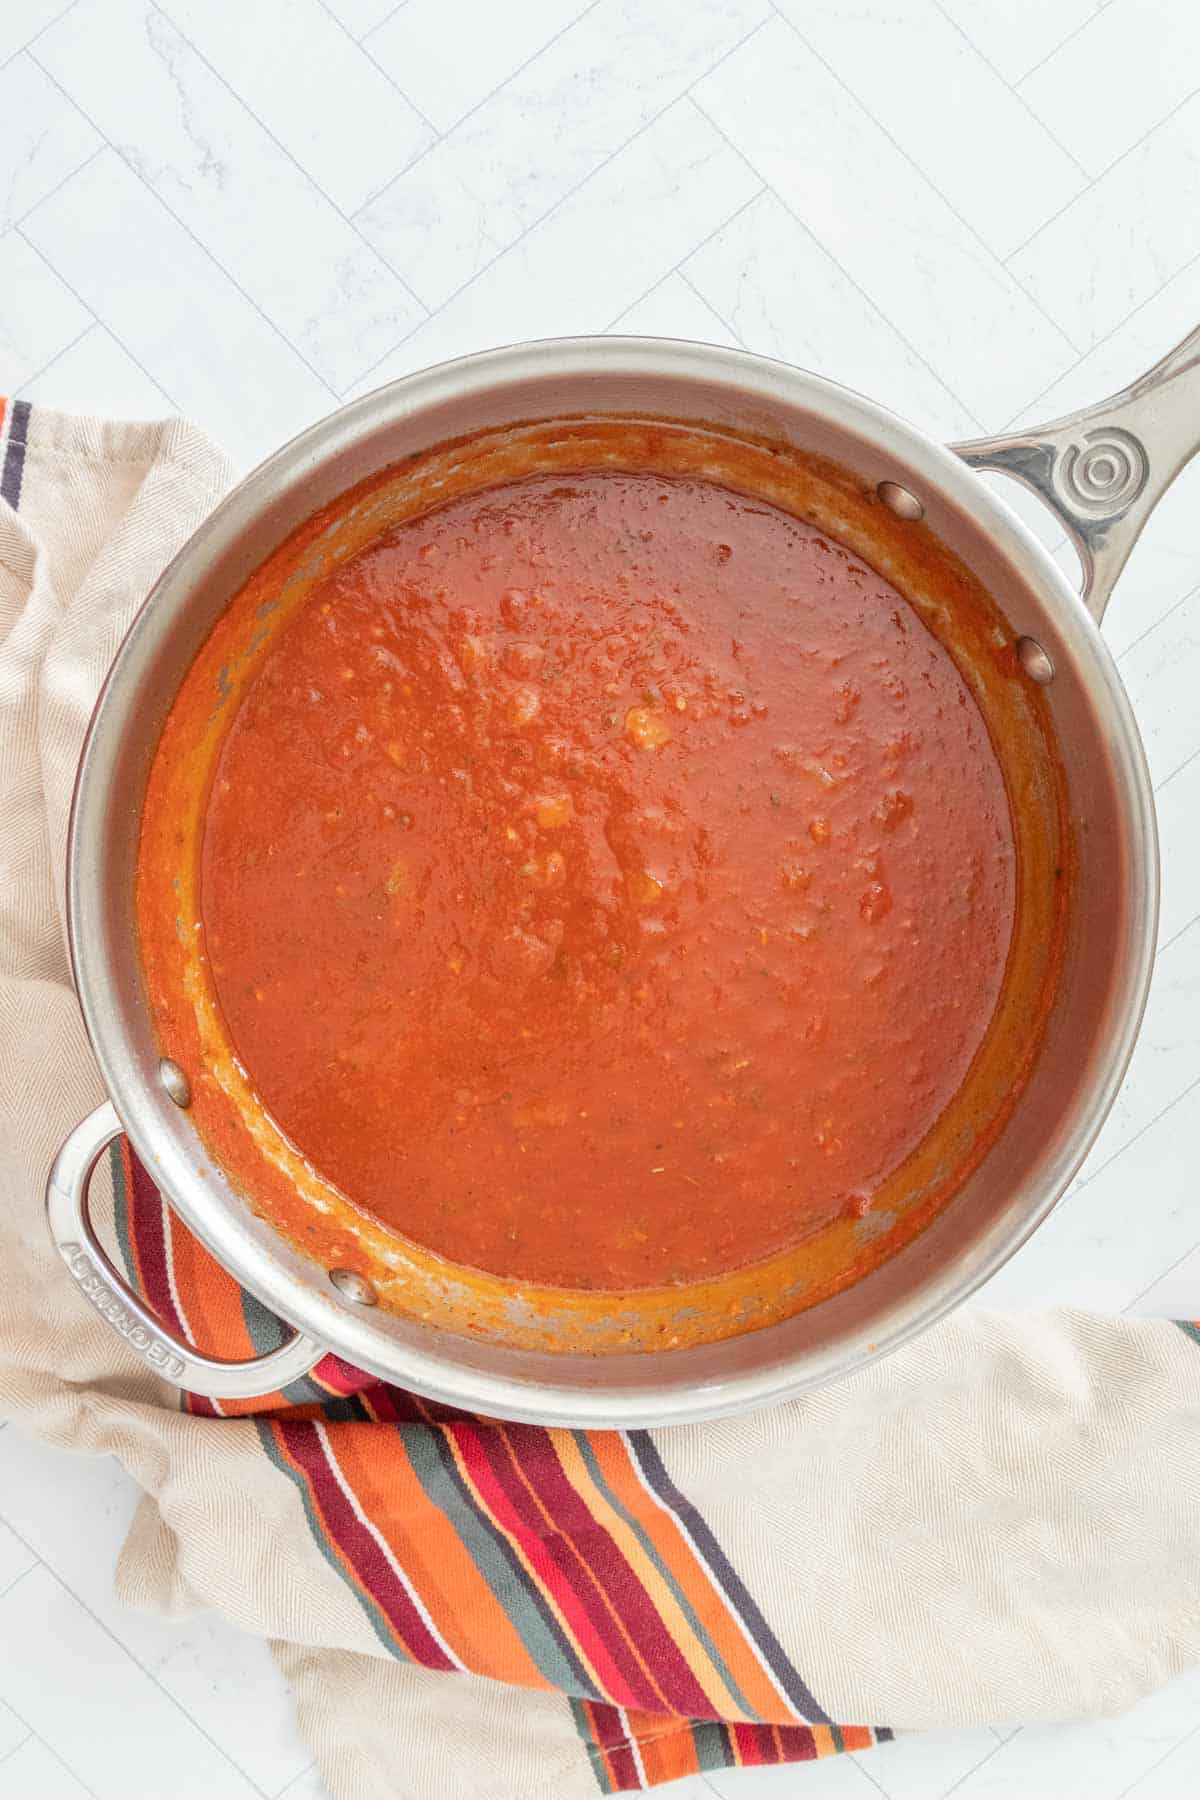 A pan full of tomato sauce on a table.